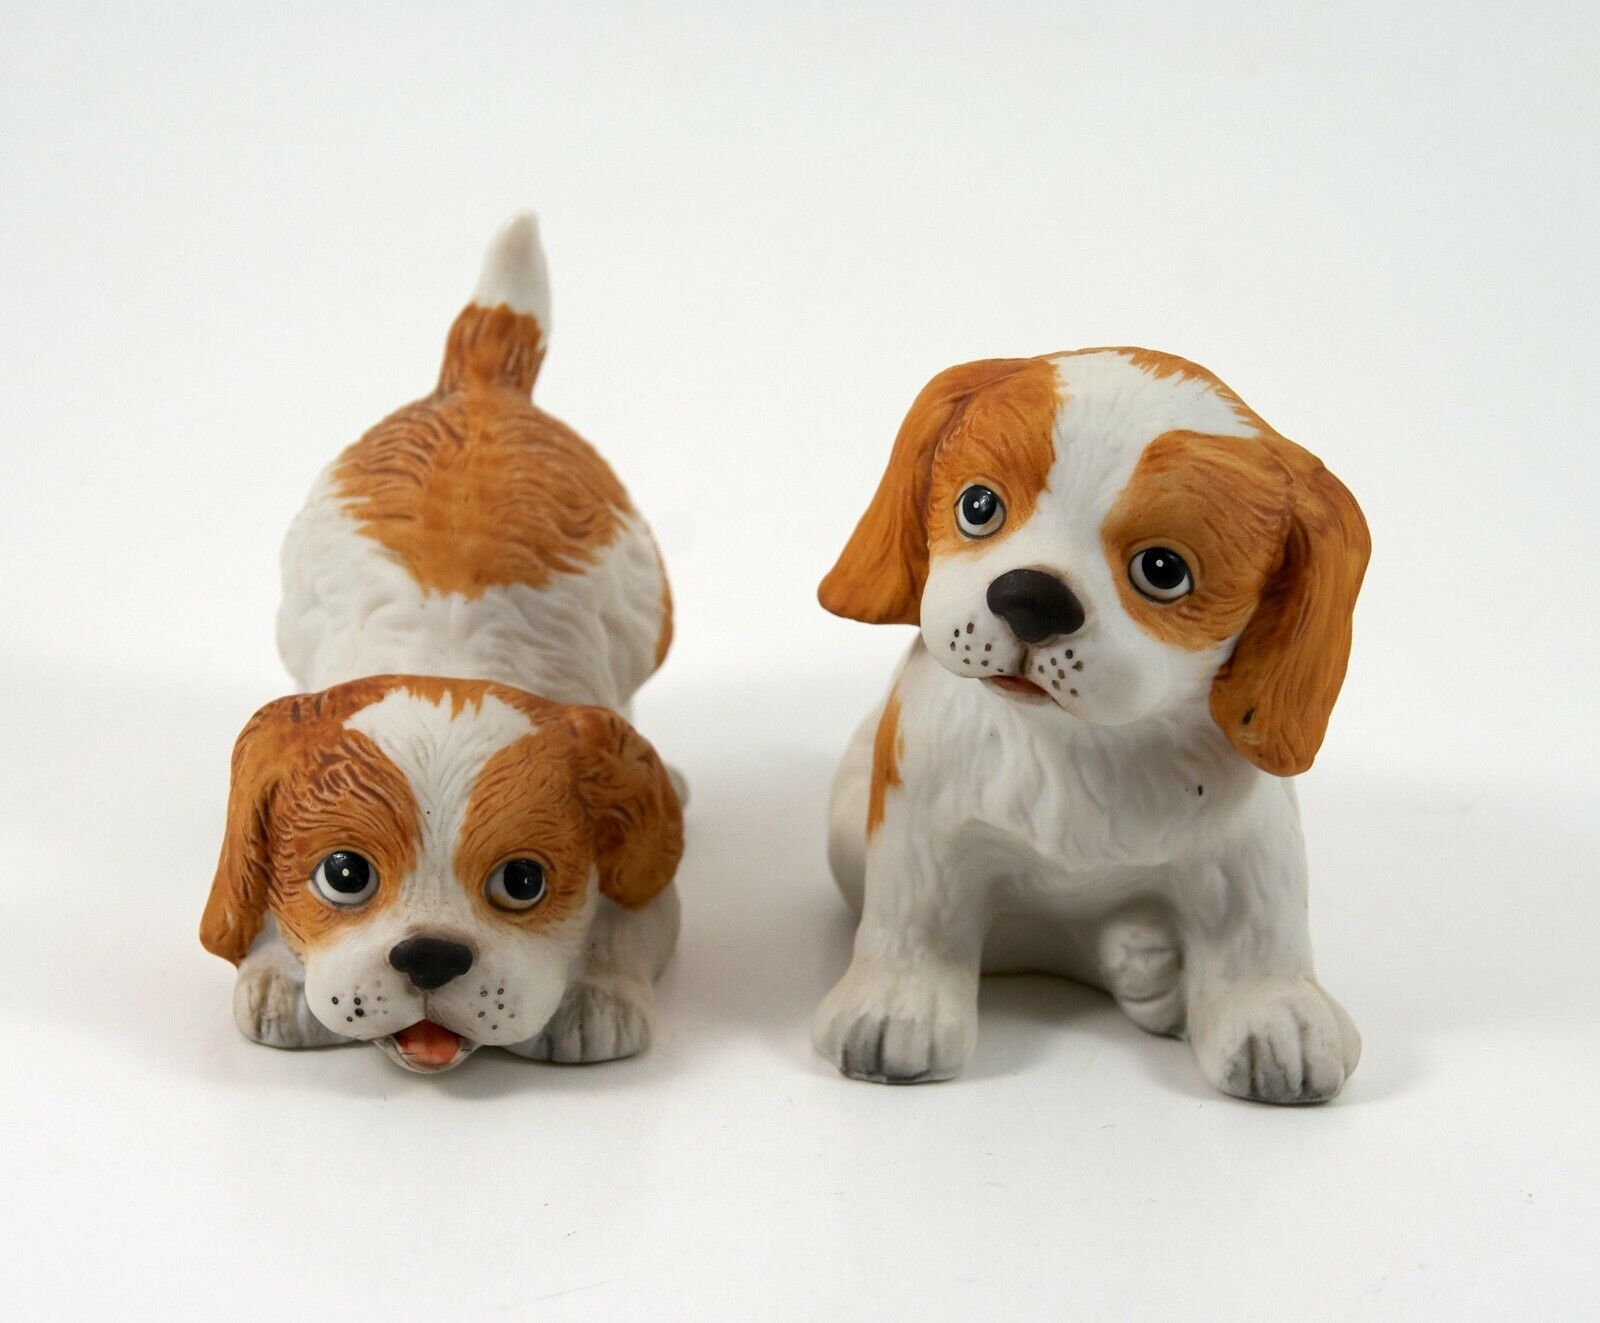 Homco Figurines Cocker Spaniel Playful Puppies # 1407 Vintage Collectable Set  - $11.99